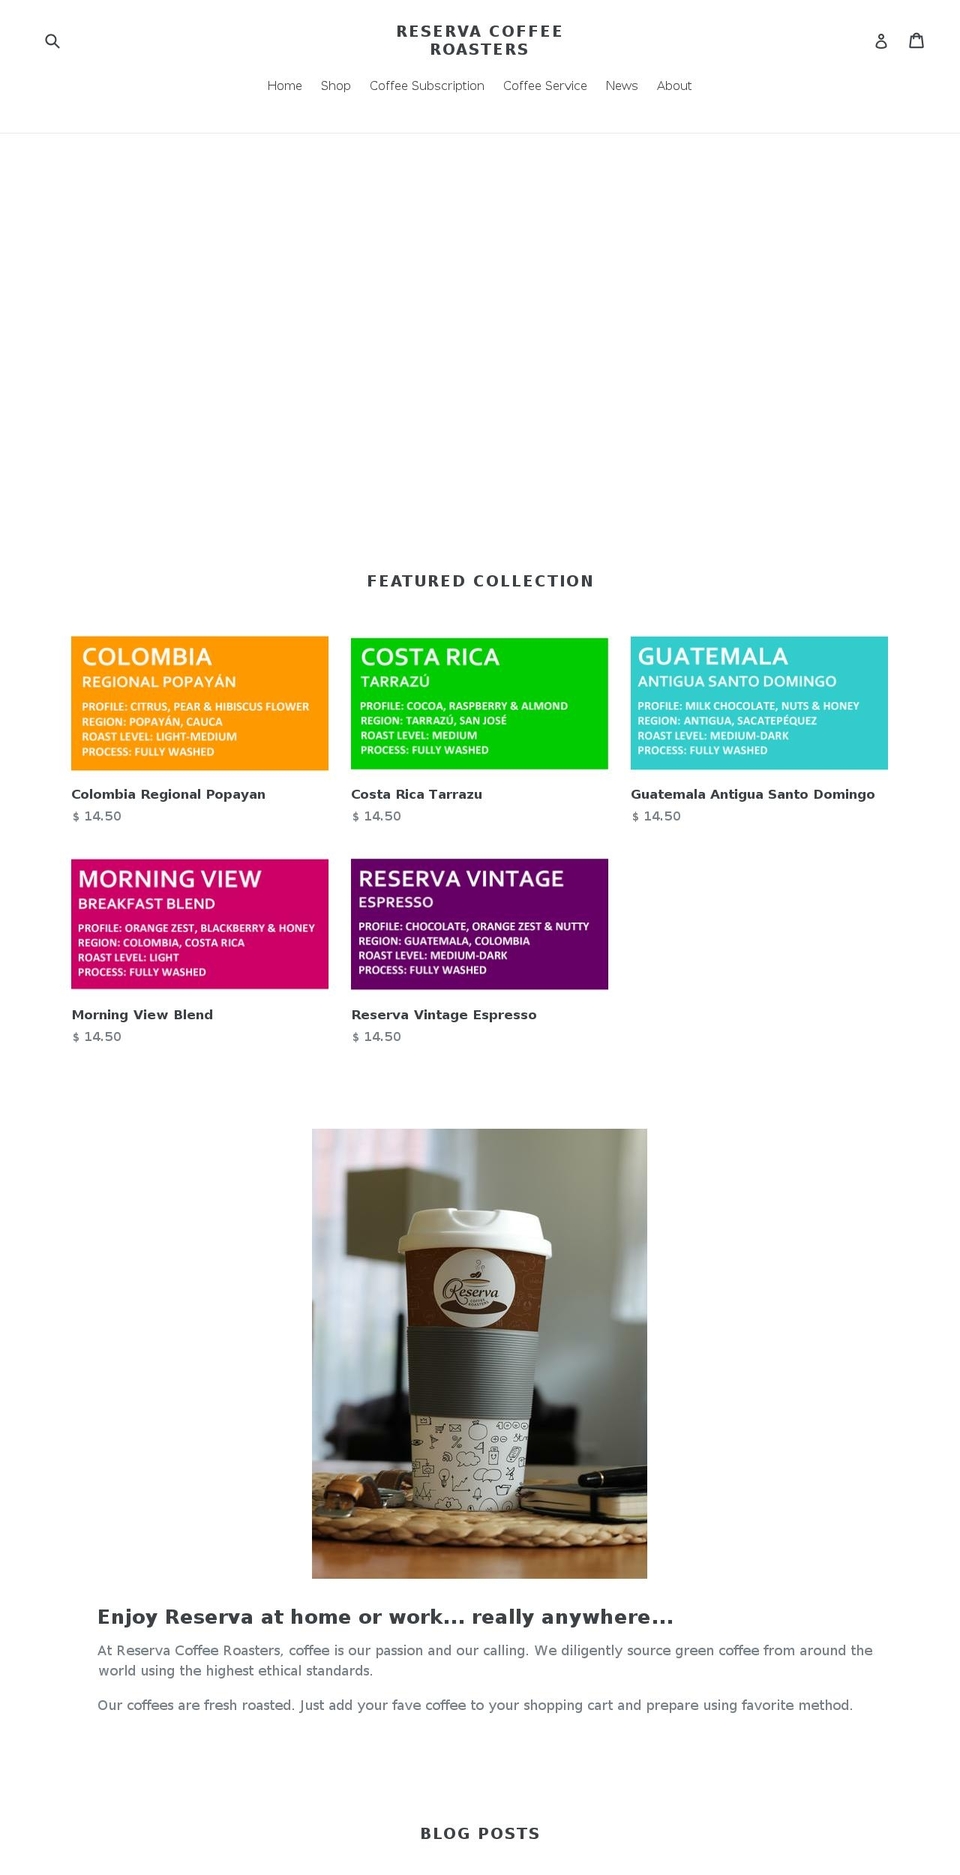 Whisk Shopify theme site example reservacoffee.com